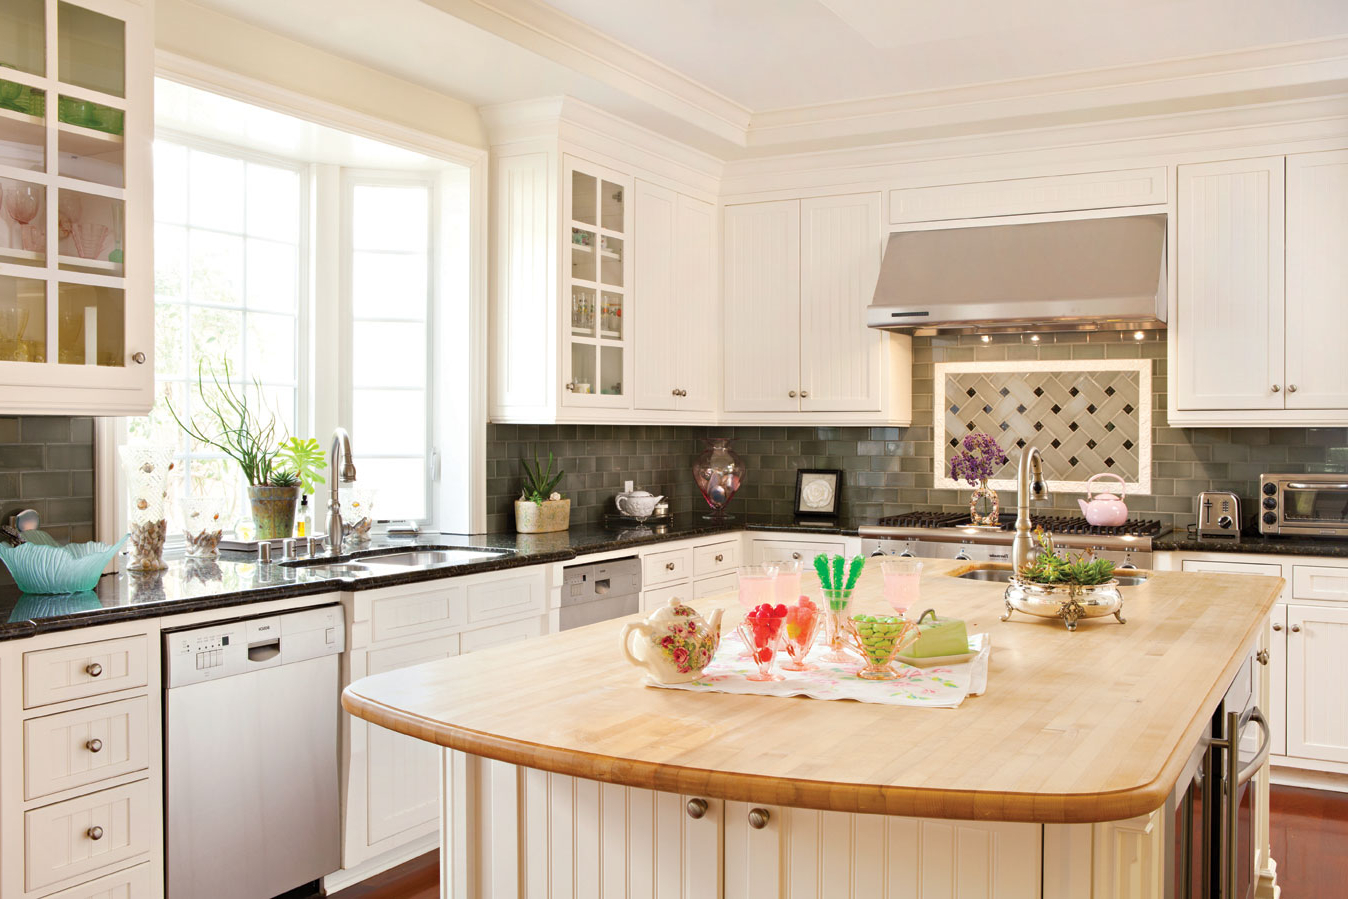 Kitchen Makeovers On A Budget That Upgrades Your